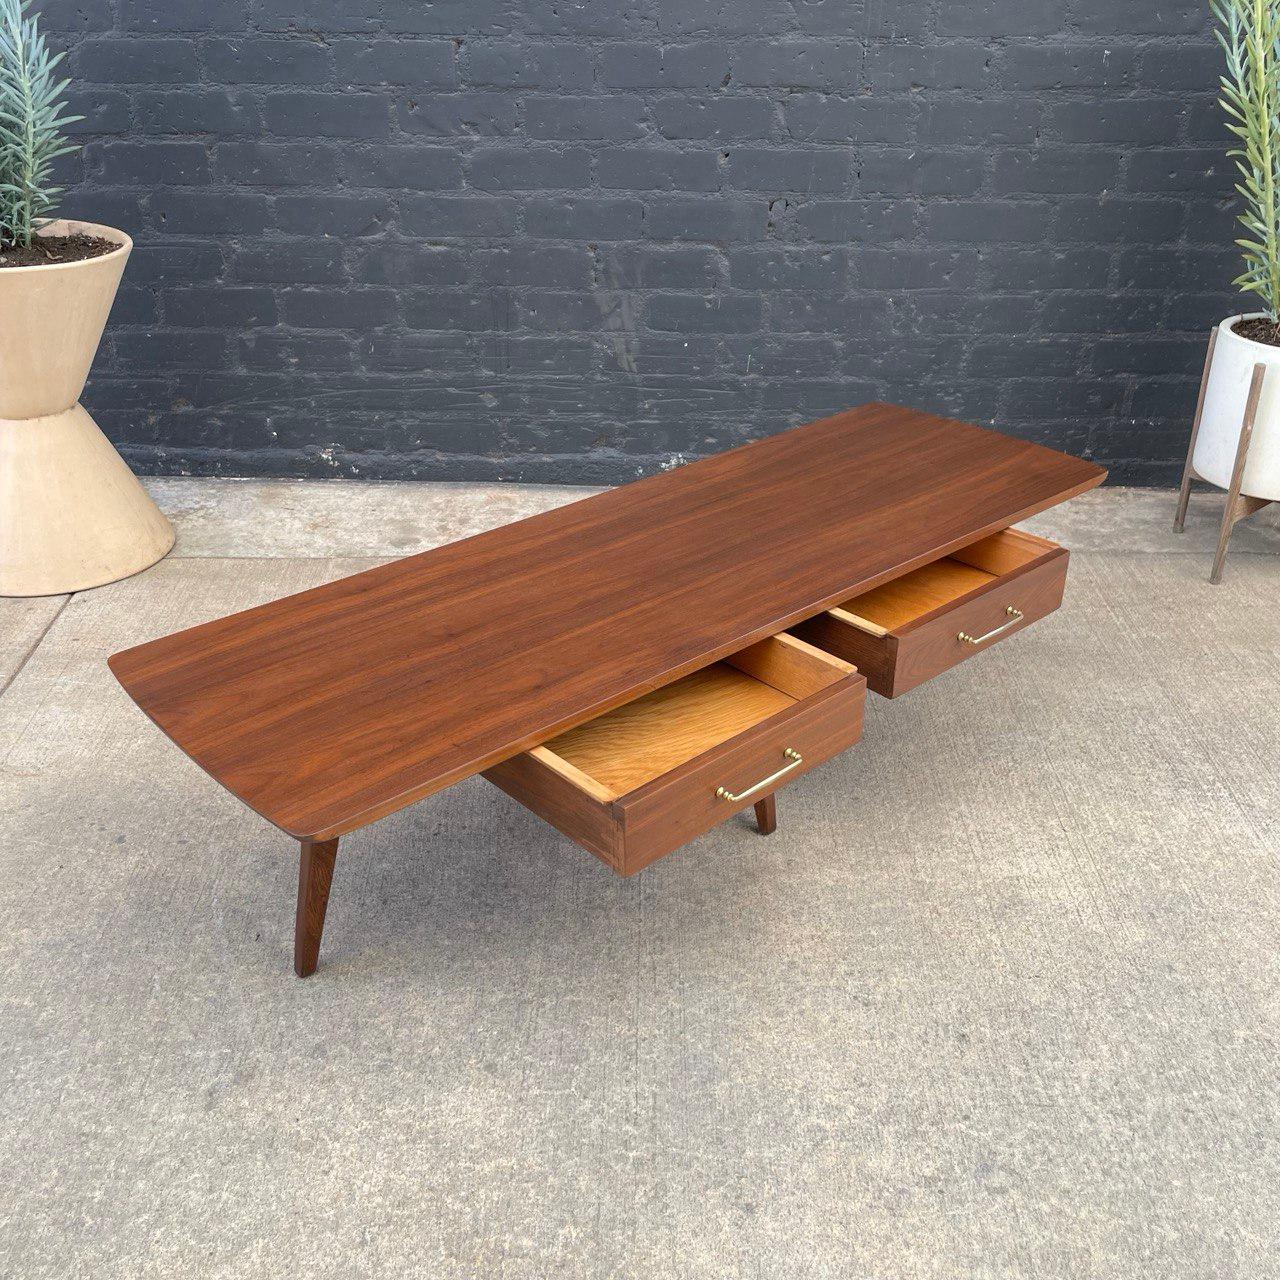 Newly Refinished - Vintage Mid-Century Modern Walnut Coffee Table In Excellent Condition For Sale In Los Angeles, CA